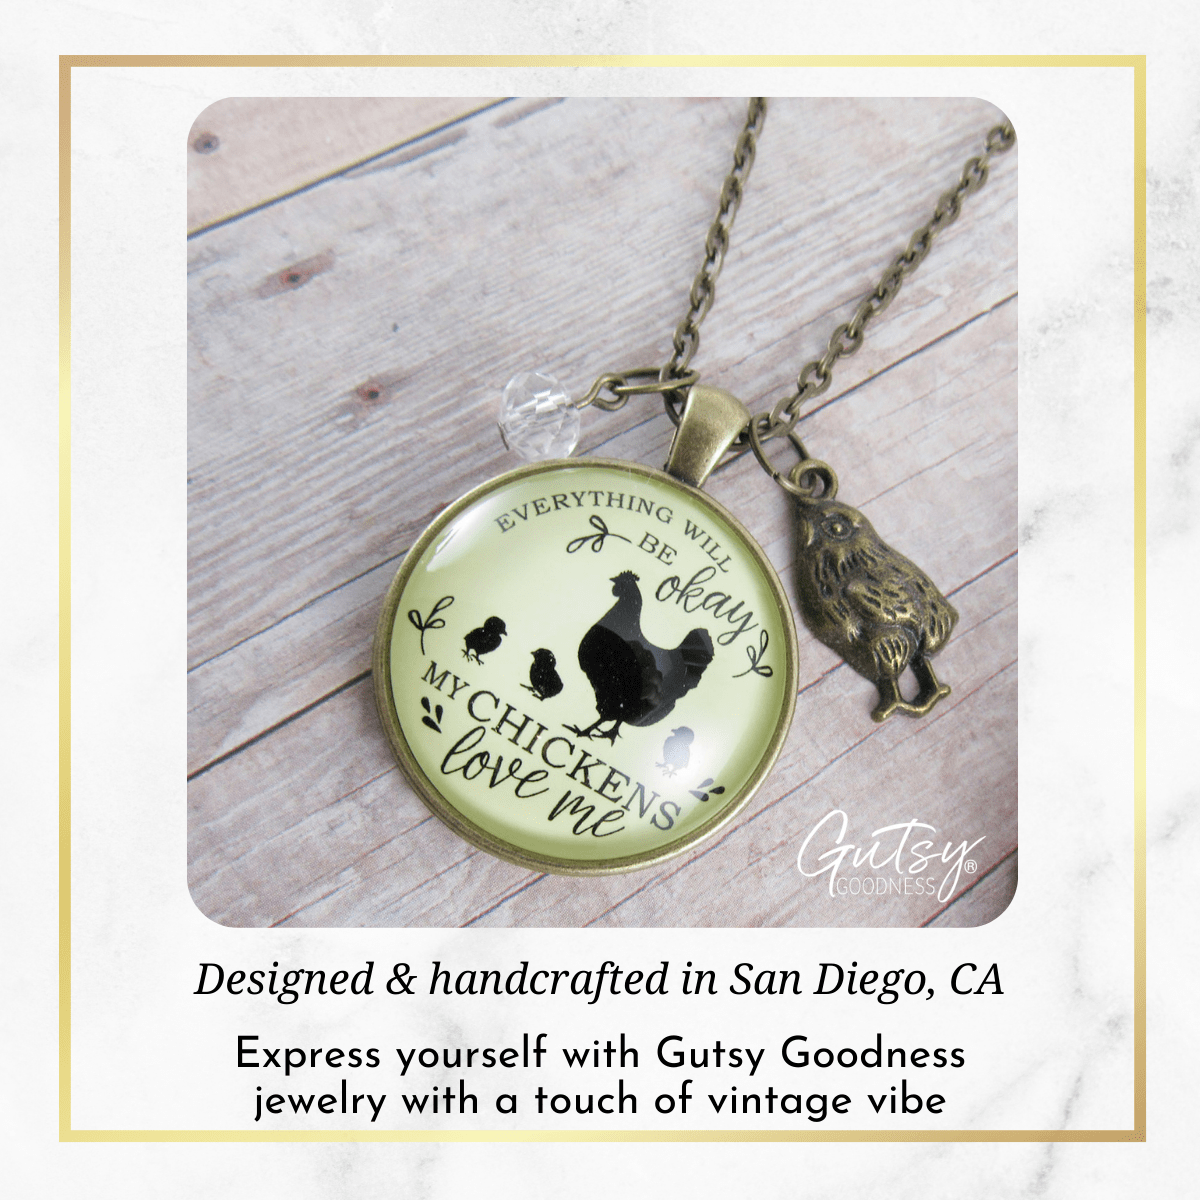 Gutsy Goodness Chicken Necklace All is Okay My Chickens Love Me Farm Inspired Jewelry - Gutsy Goodness;Chicken Necklace All Is Okay My Chickens Love Me Farm Inspired Jewelry - Gutsy Goodness Handmade Jewelry Gifts